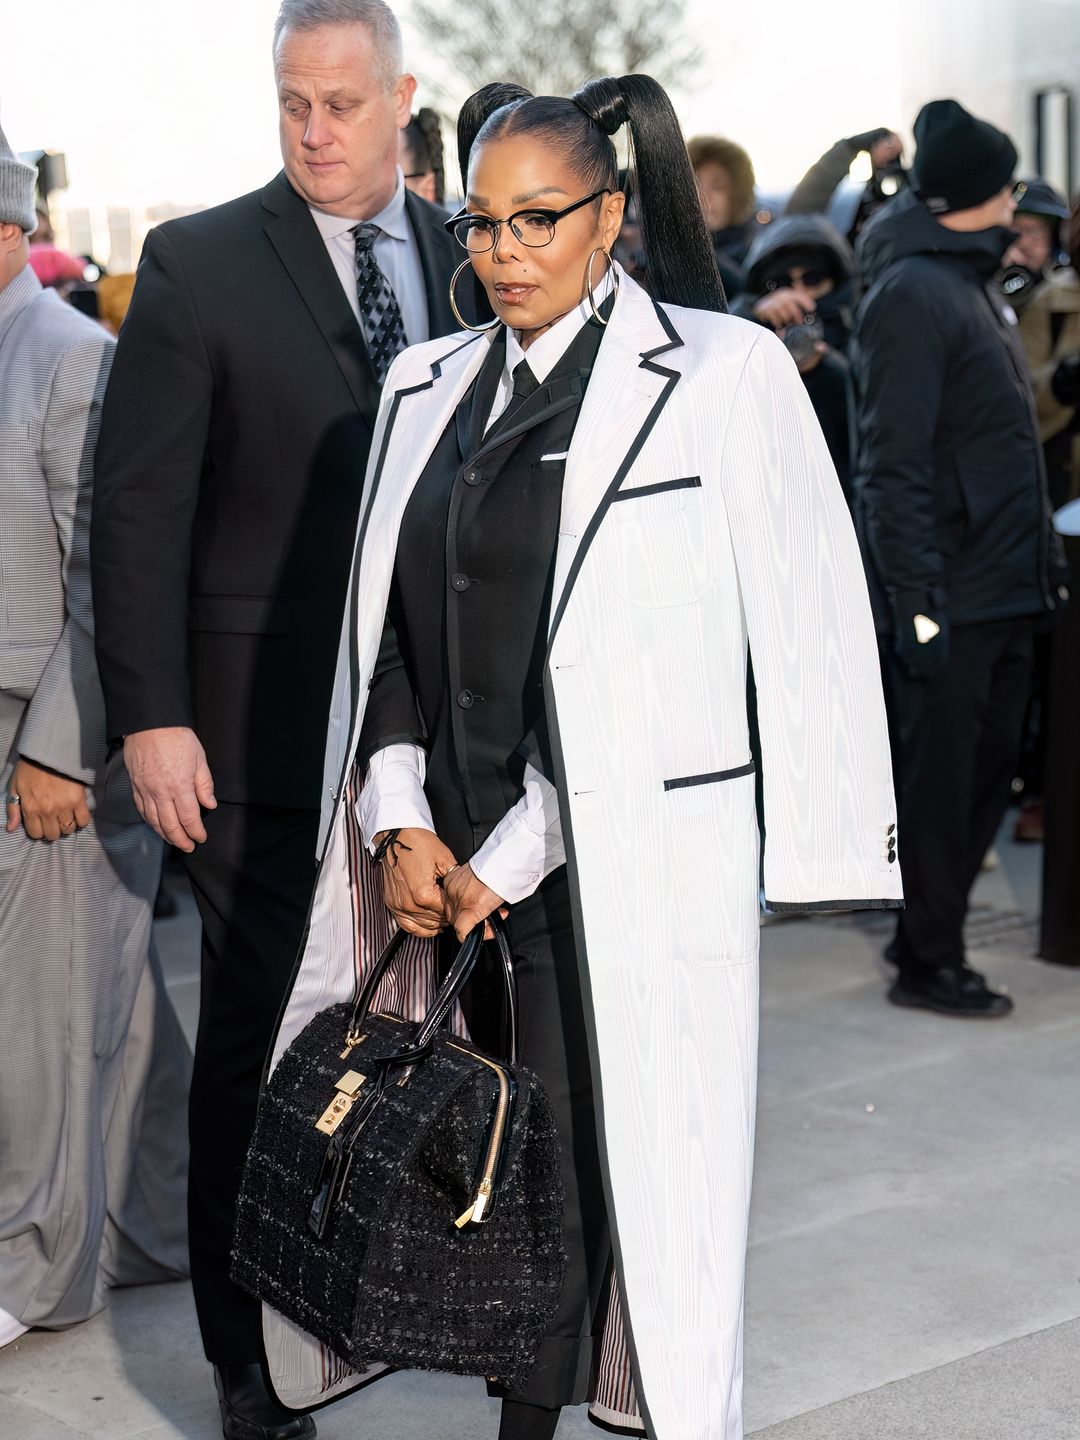 Janet Jackson attended the Thom Browne show in a full Thom Browne look complete with pigtails and oversized hoop earrings. 